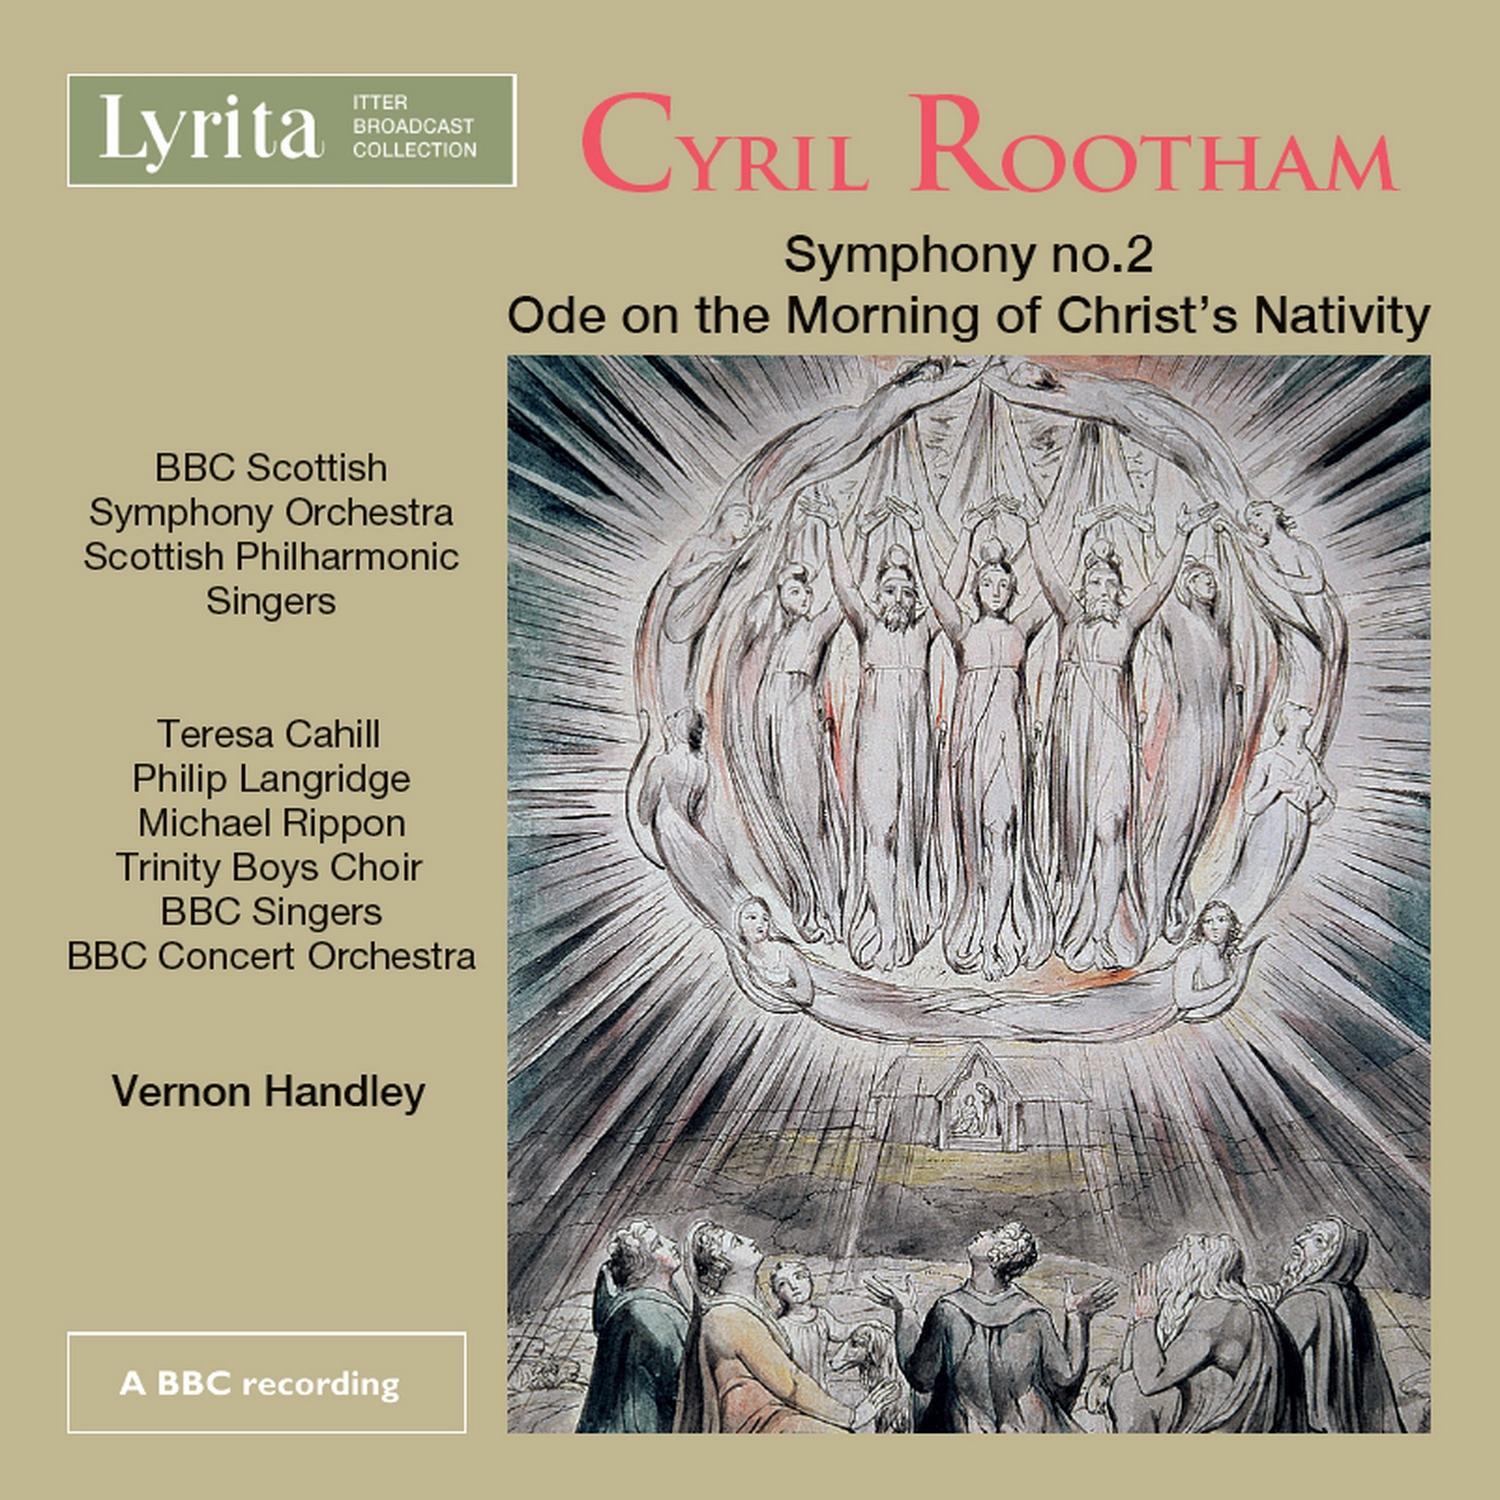 Cyril Rootham - Ode on the Morning of Christ's Nativity: Stanzas XXI - XXVII